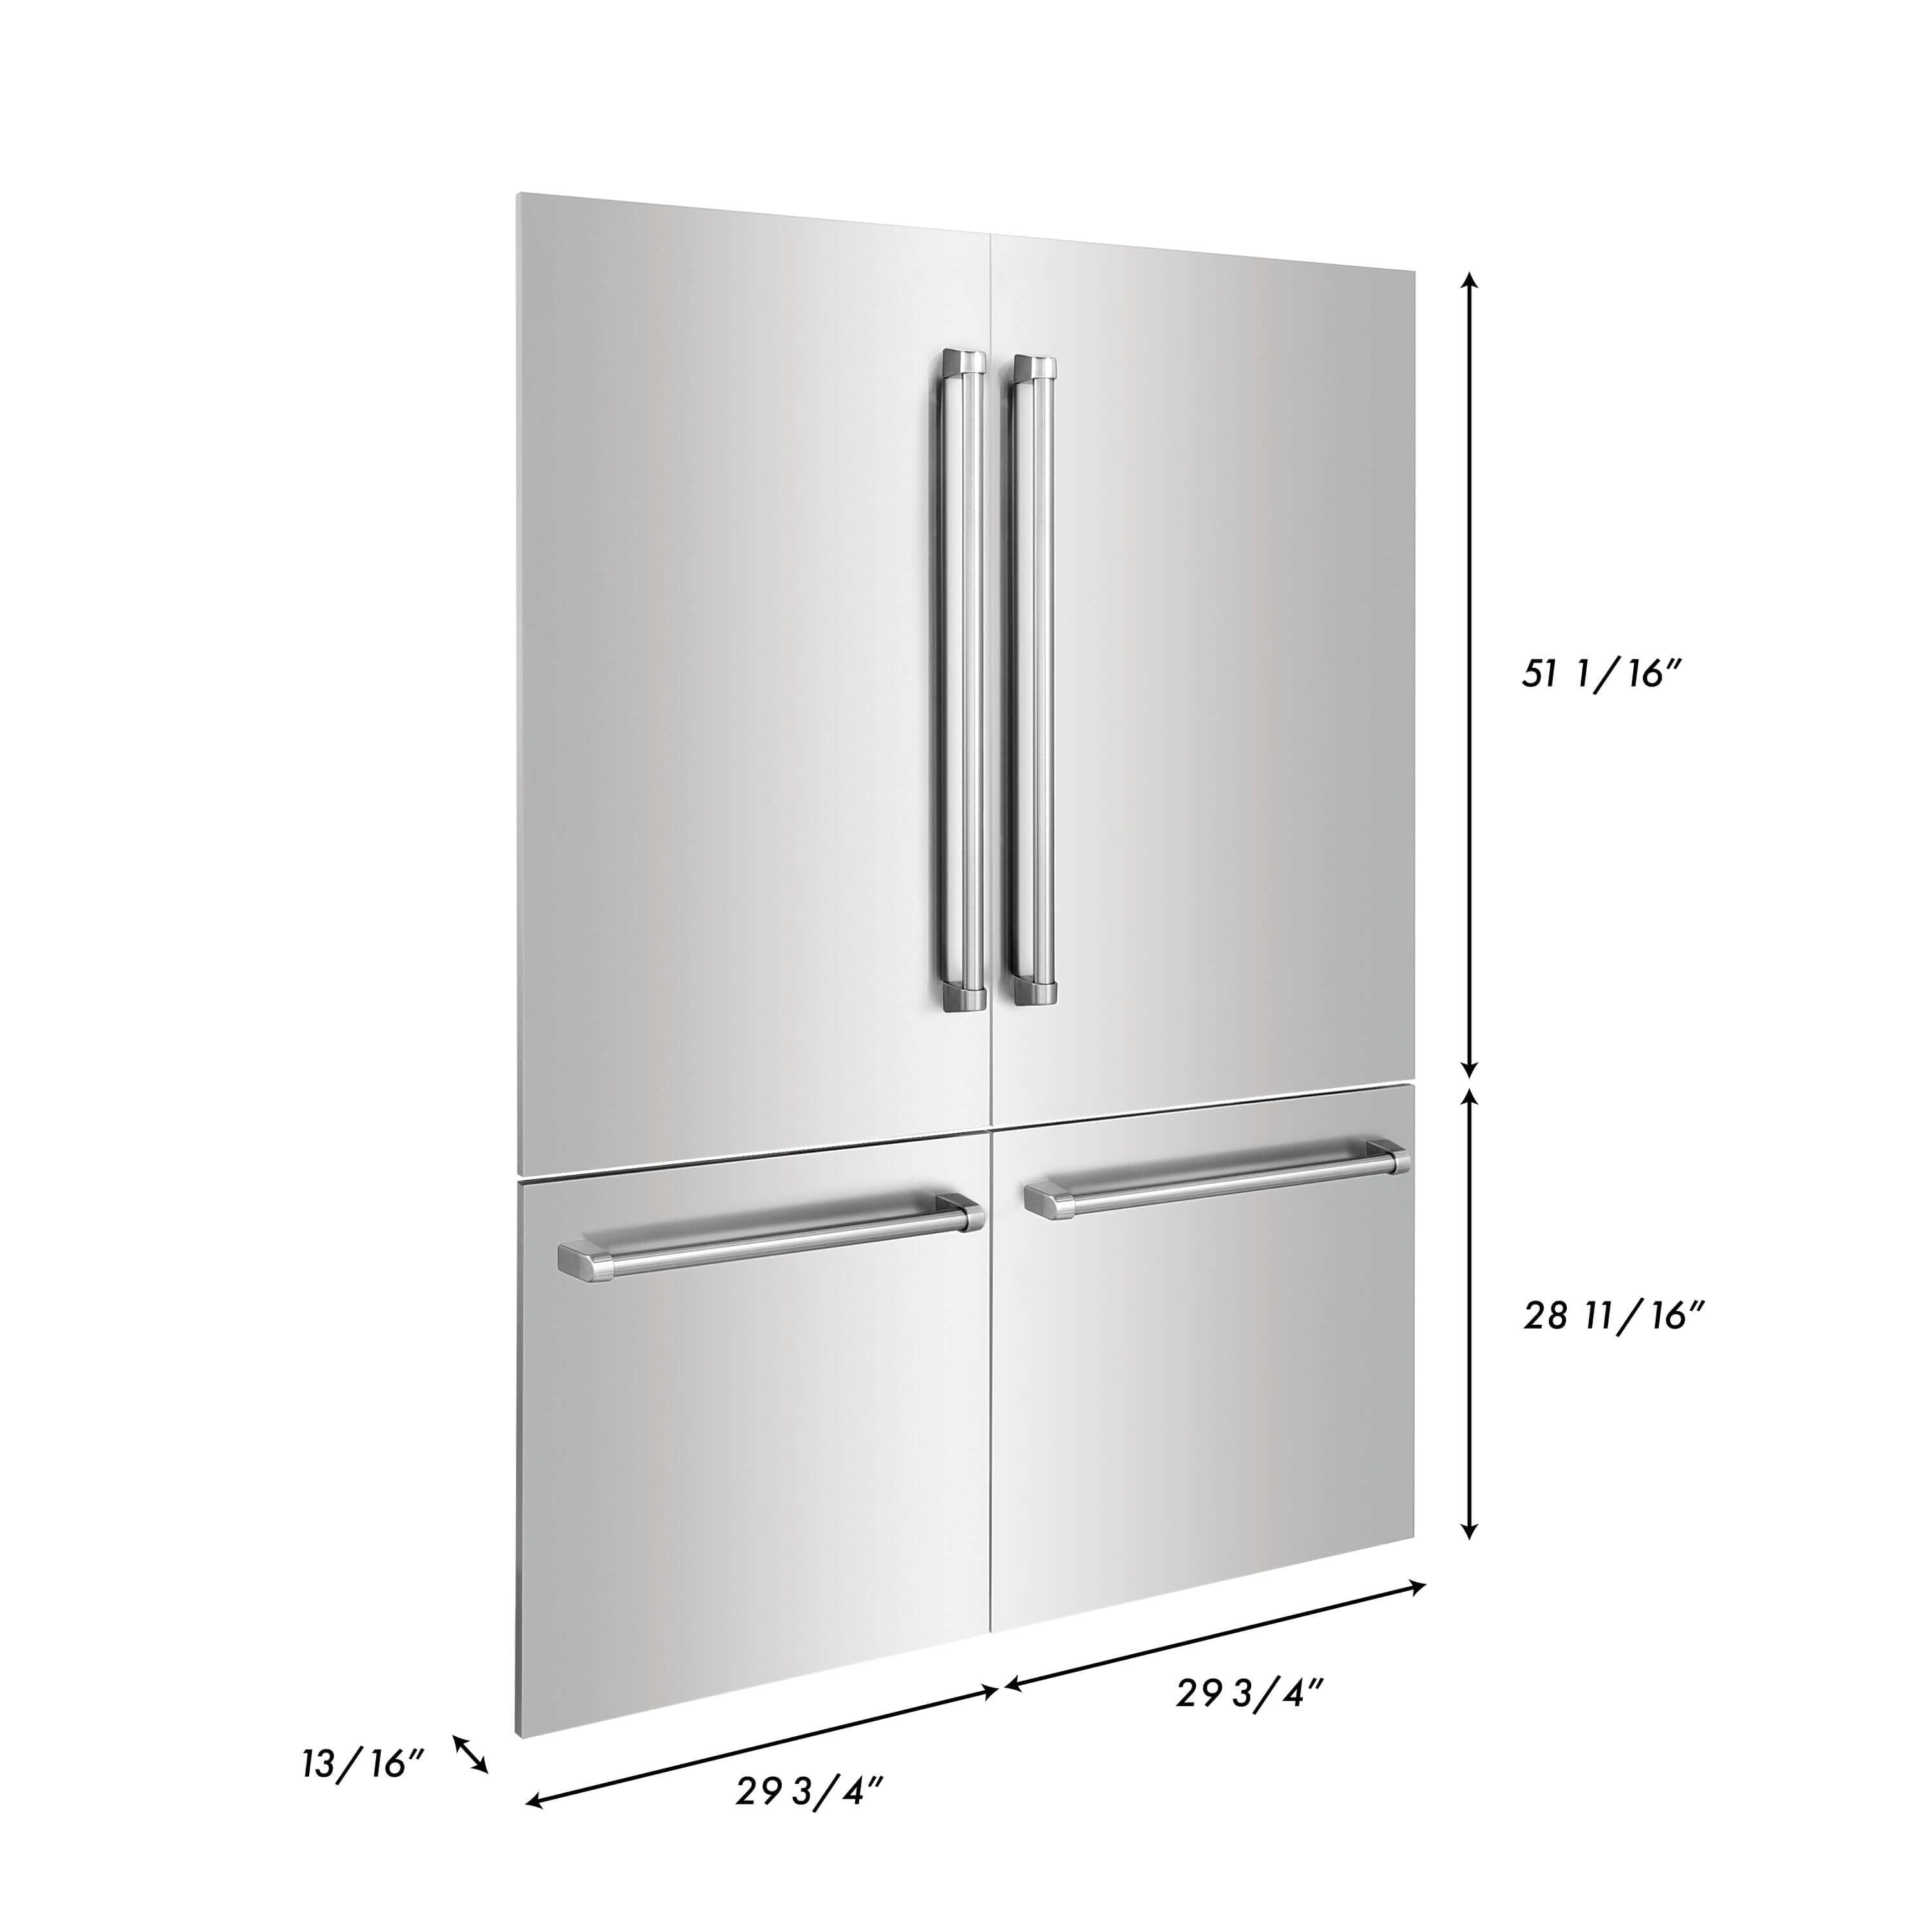 Panels & Handles Only- ZLINE 60 in. Refrigerator Panels in Stainless Steel for a 60 in. Built-in Refrigerator (RPBIV-304-60) dimensional diagram with measurements.